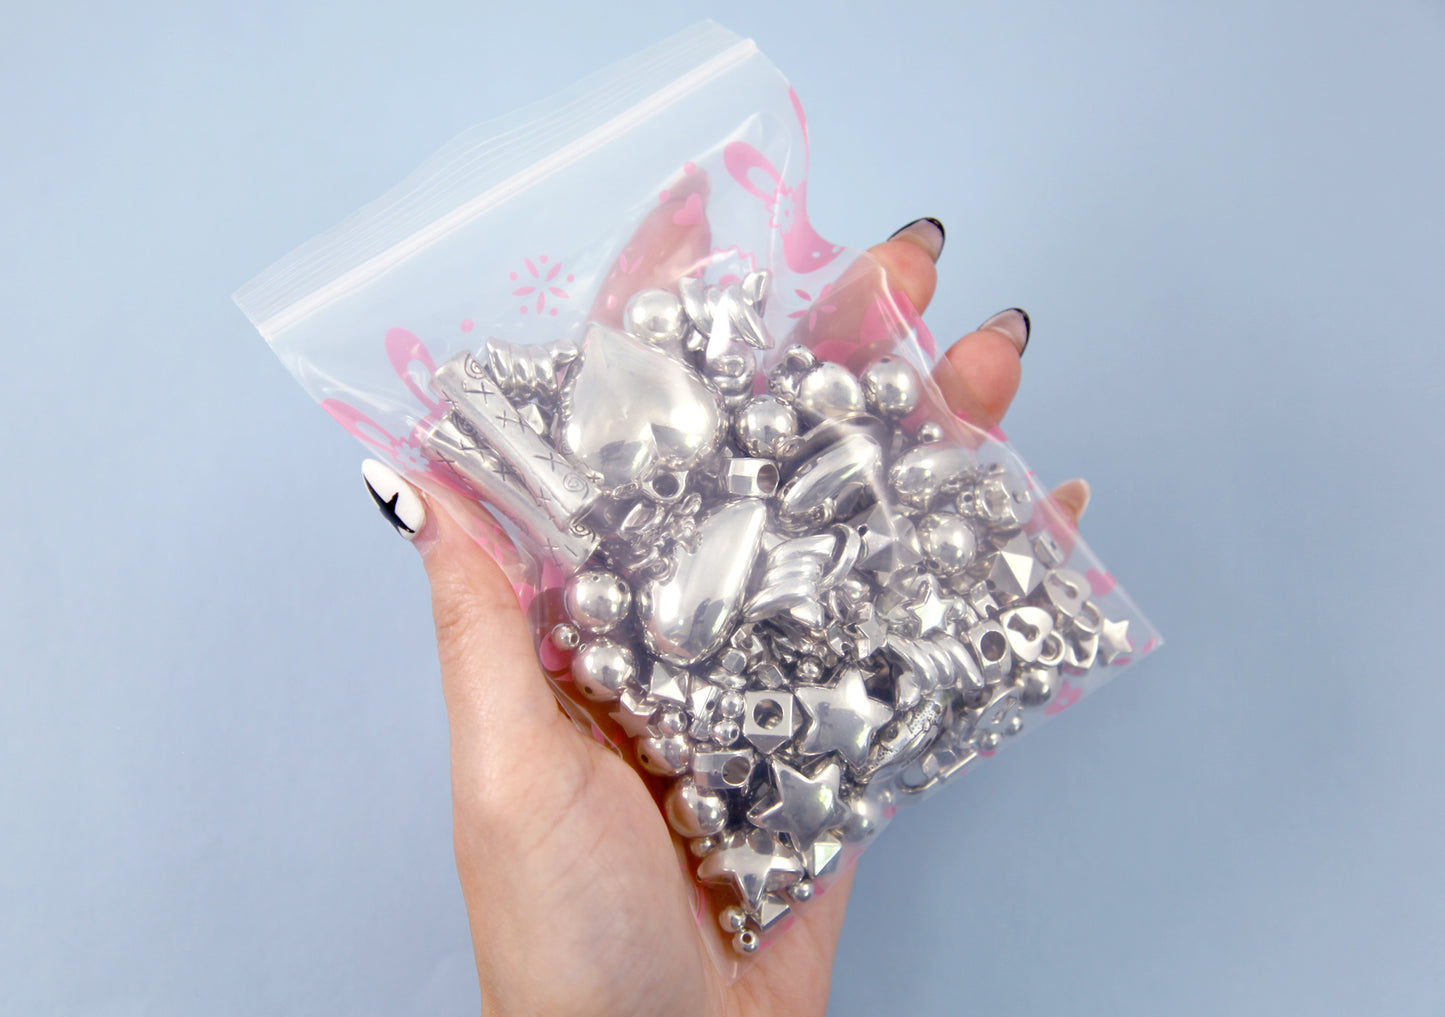 Metallic Silver Bead Grab Bag - Electroplated Silver - Mixed Lot - great for kandi, ispy, sensory crafts, jewelry making - Over 200 pcs